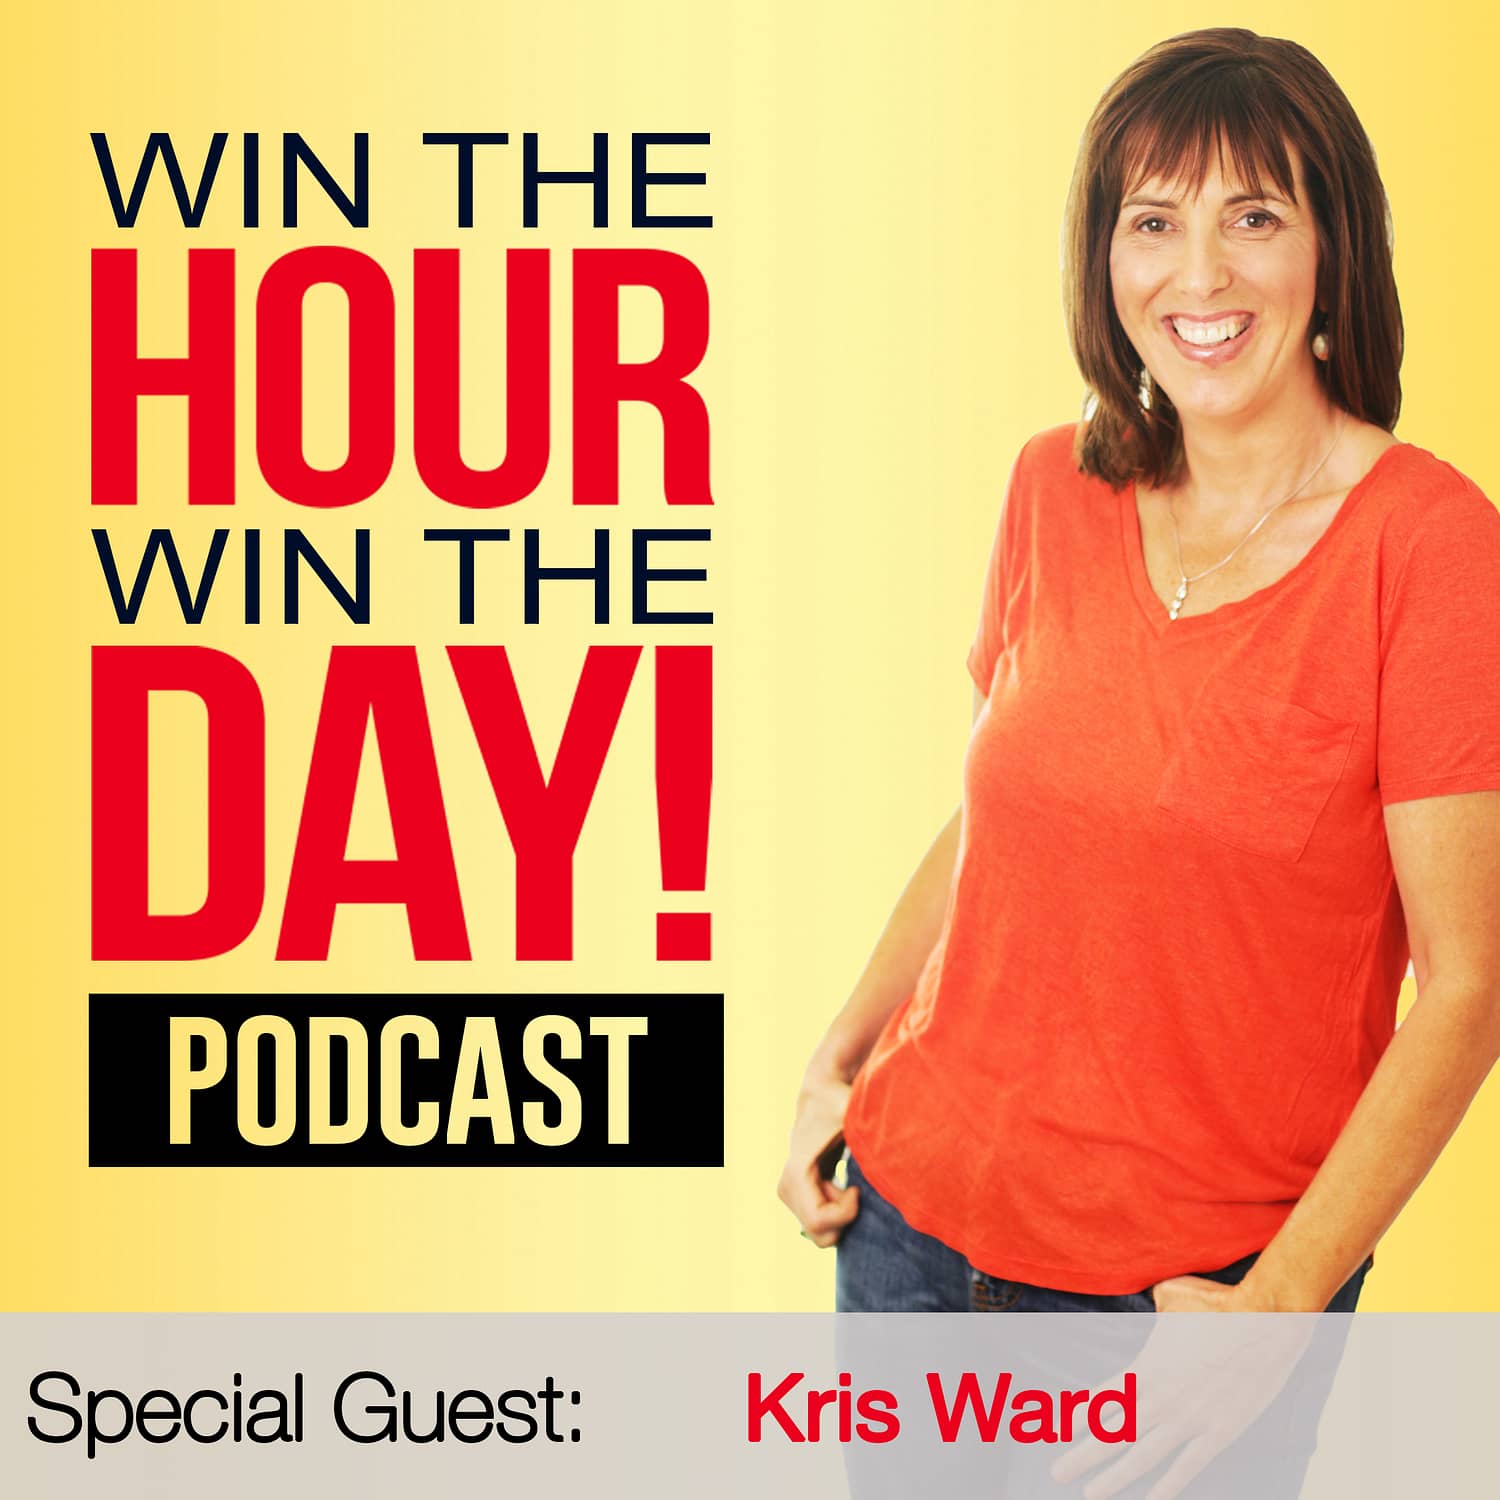 Hiring Process Mistakes Every Entrepreneur Should Avoid! with Kris Ward